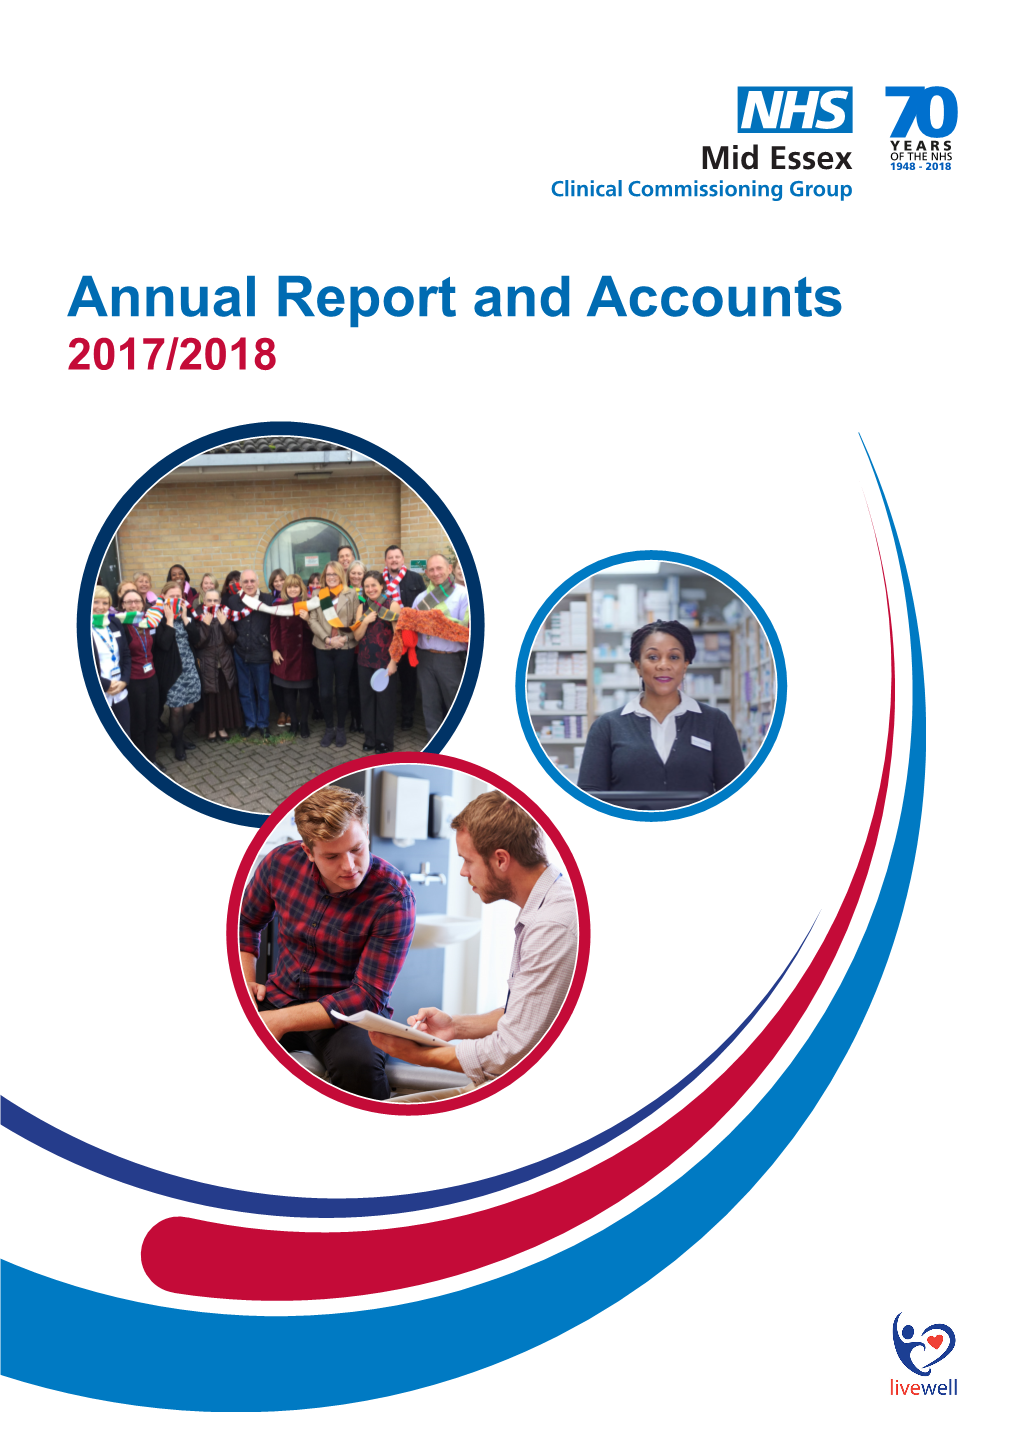 Annual Report and Accounts 2017/2018 Mid Essex CCG Annual Report and Accounts 2017/18